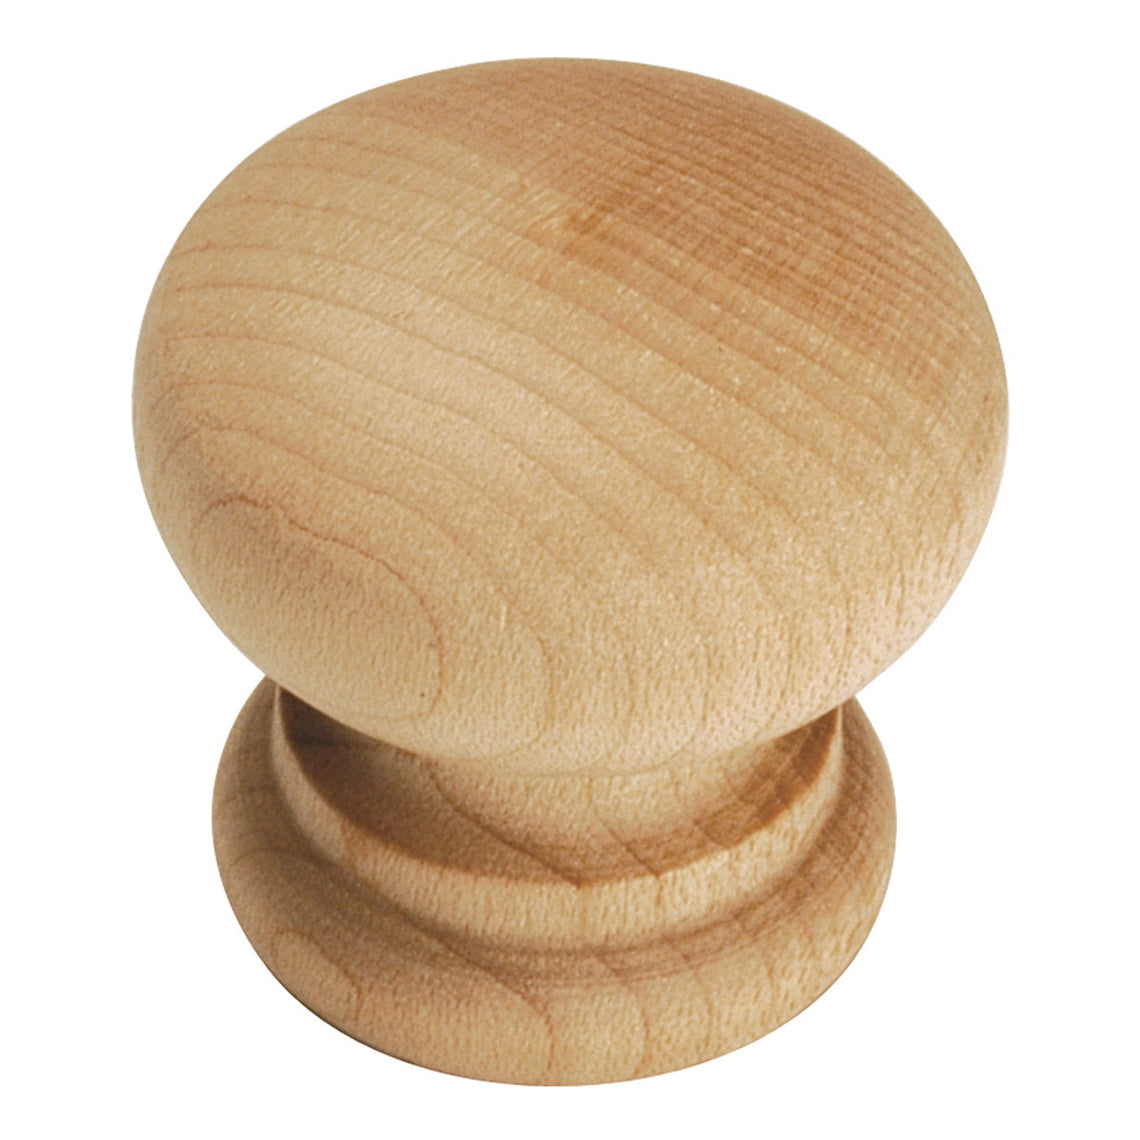 Drawer Knob 1-1/4 Inch Diameter (2 Pack) - Natural Woodcraft Collection